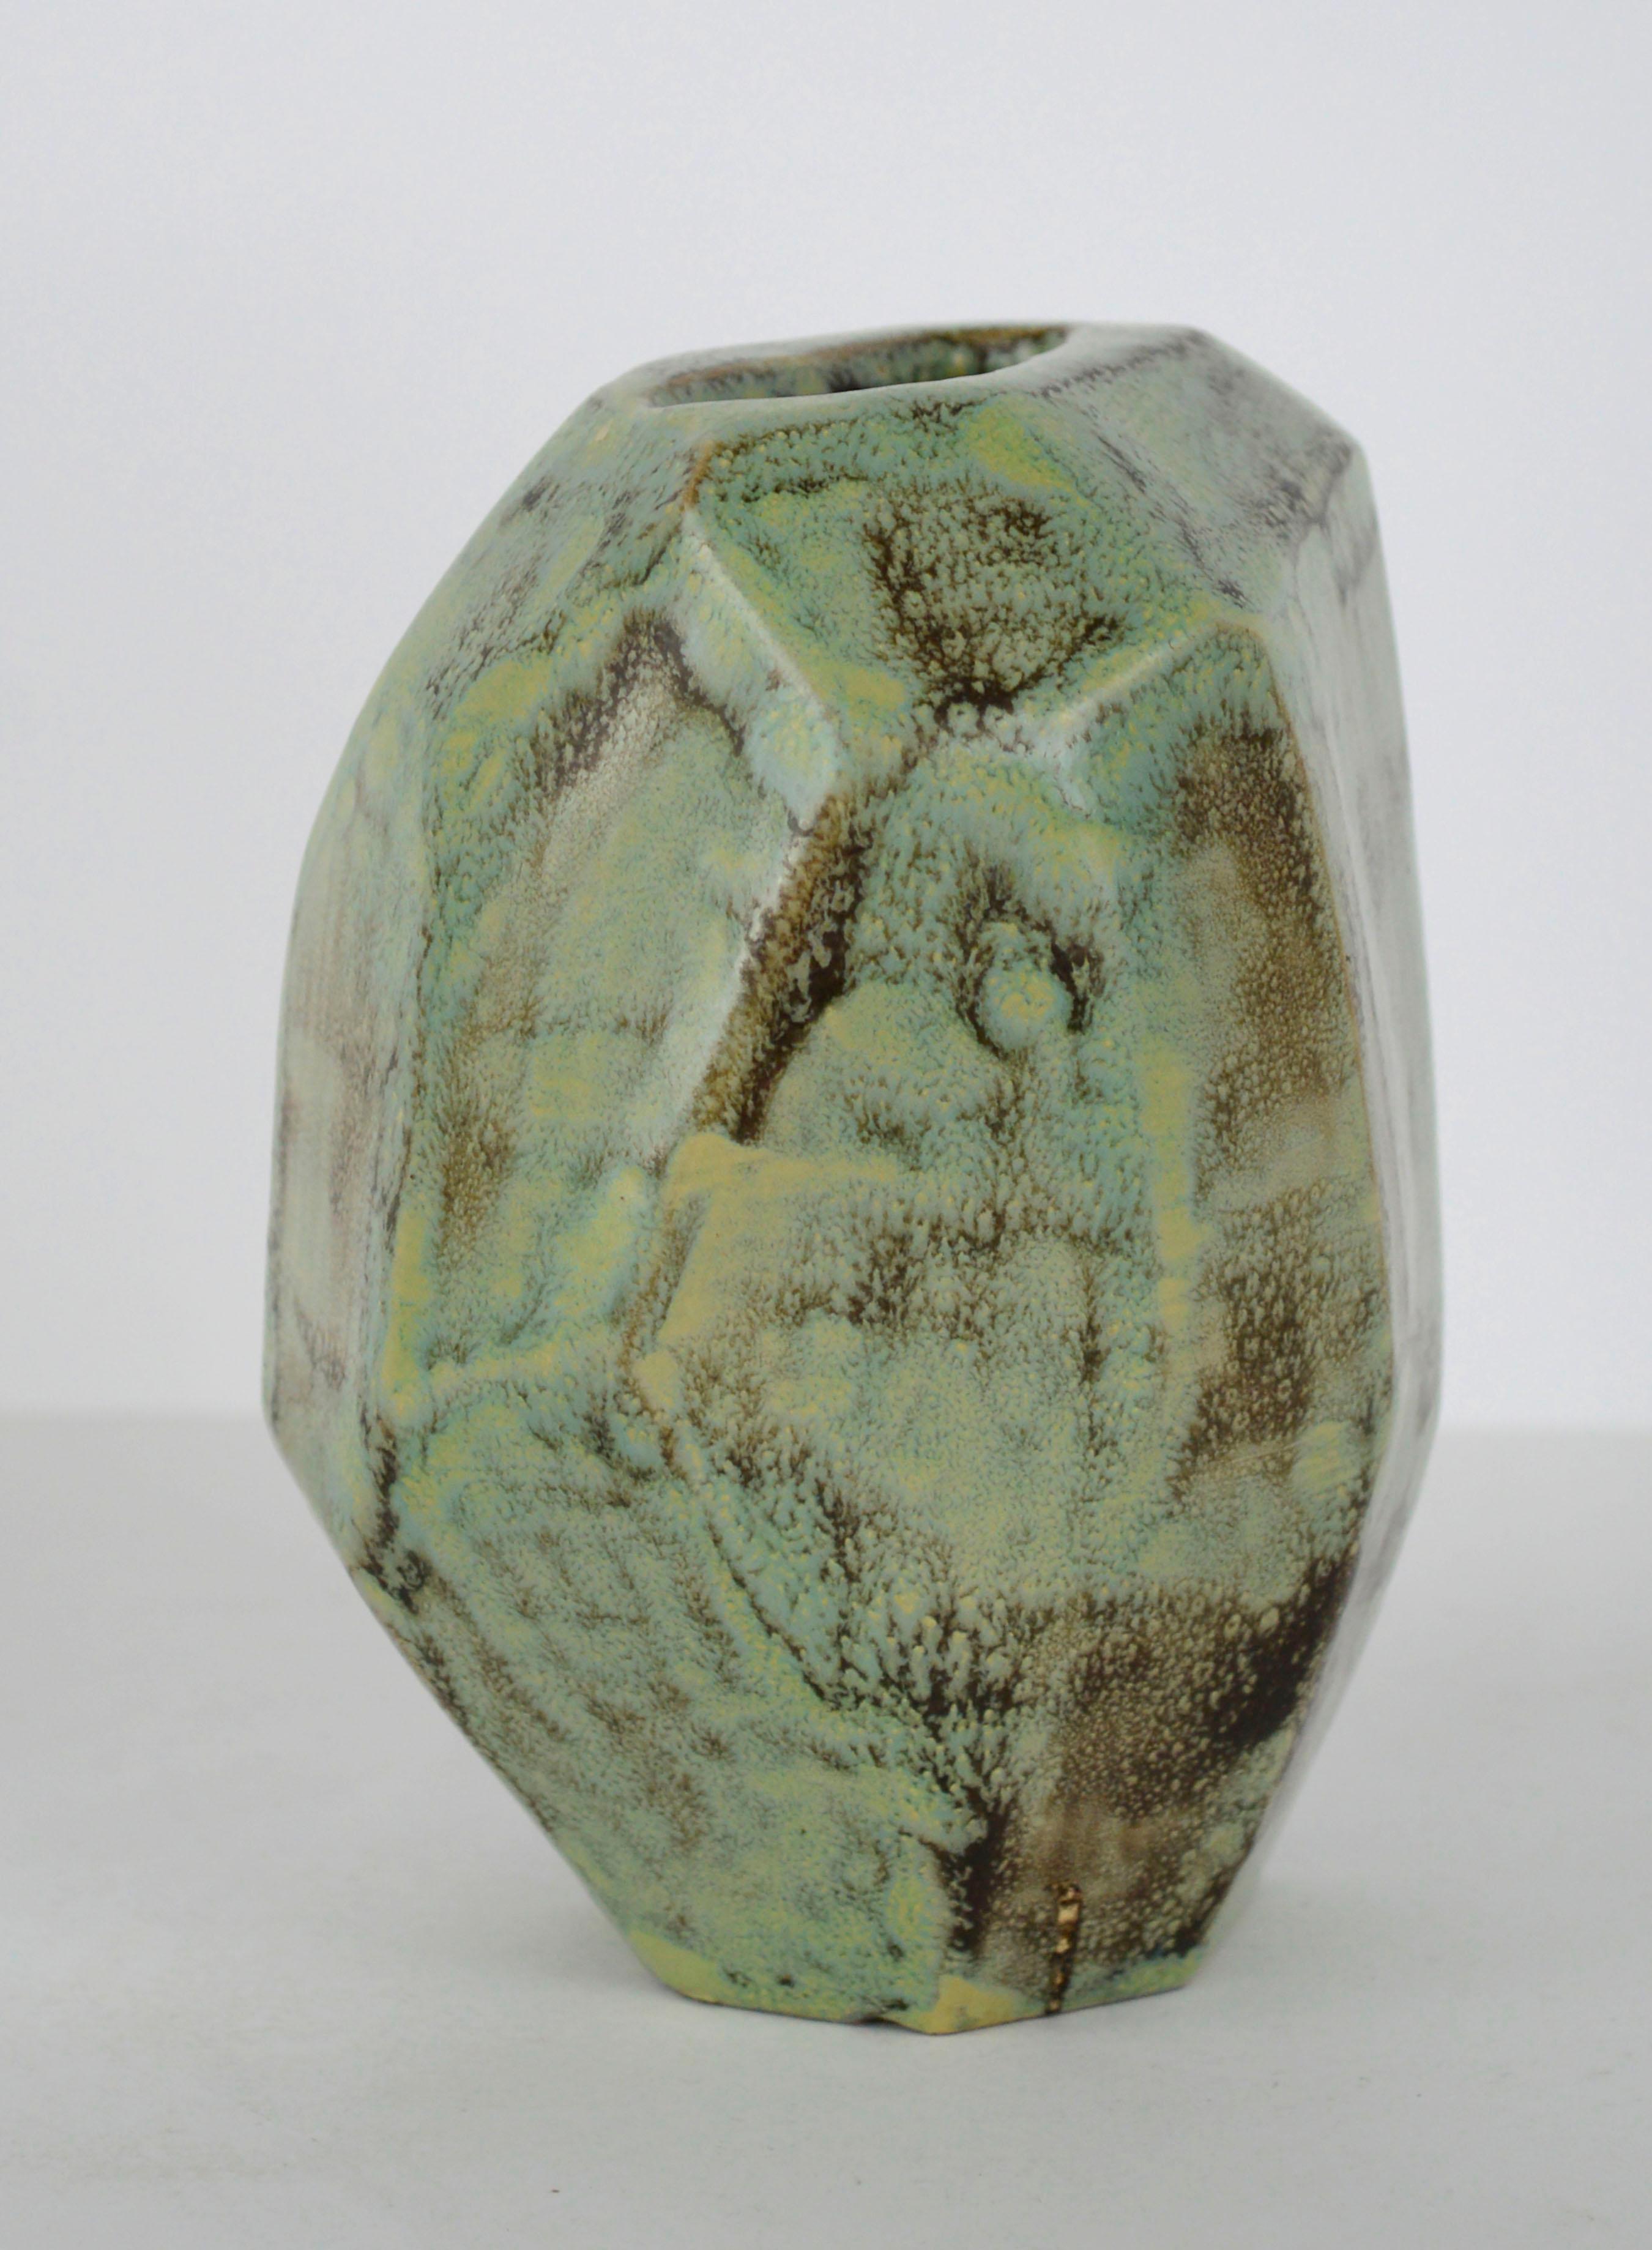 1950's Organic Modern Ceramic Turquoise Abstract Sculpture / Pottery Art Vase  For Sale 3